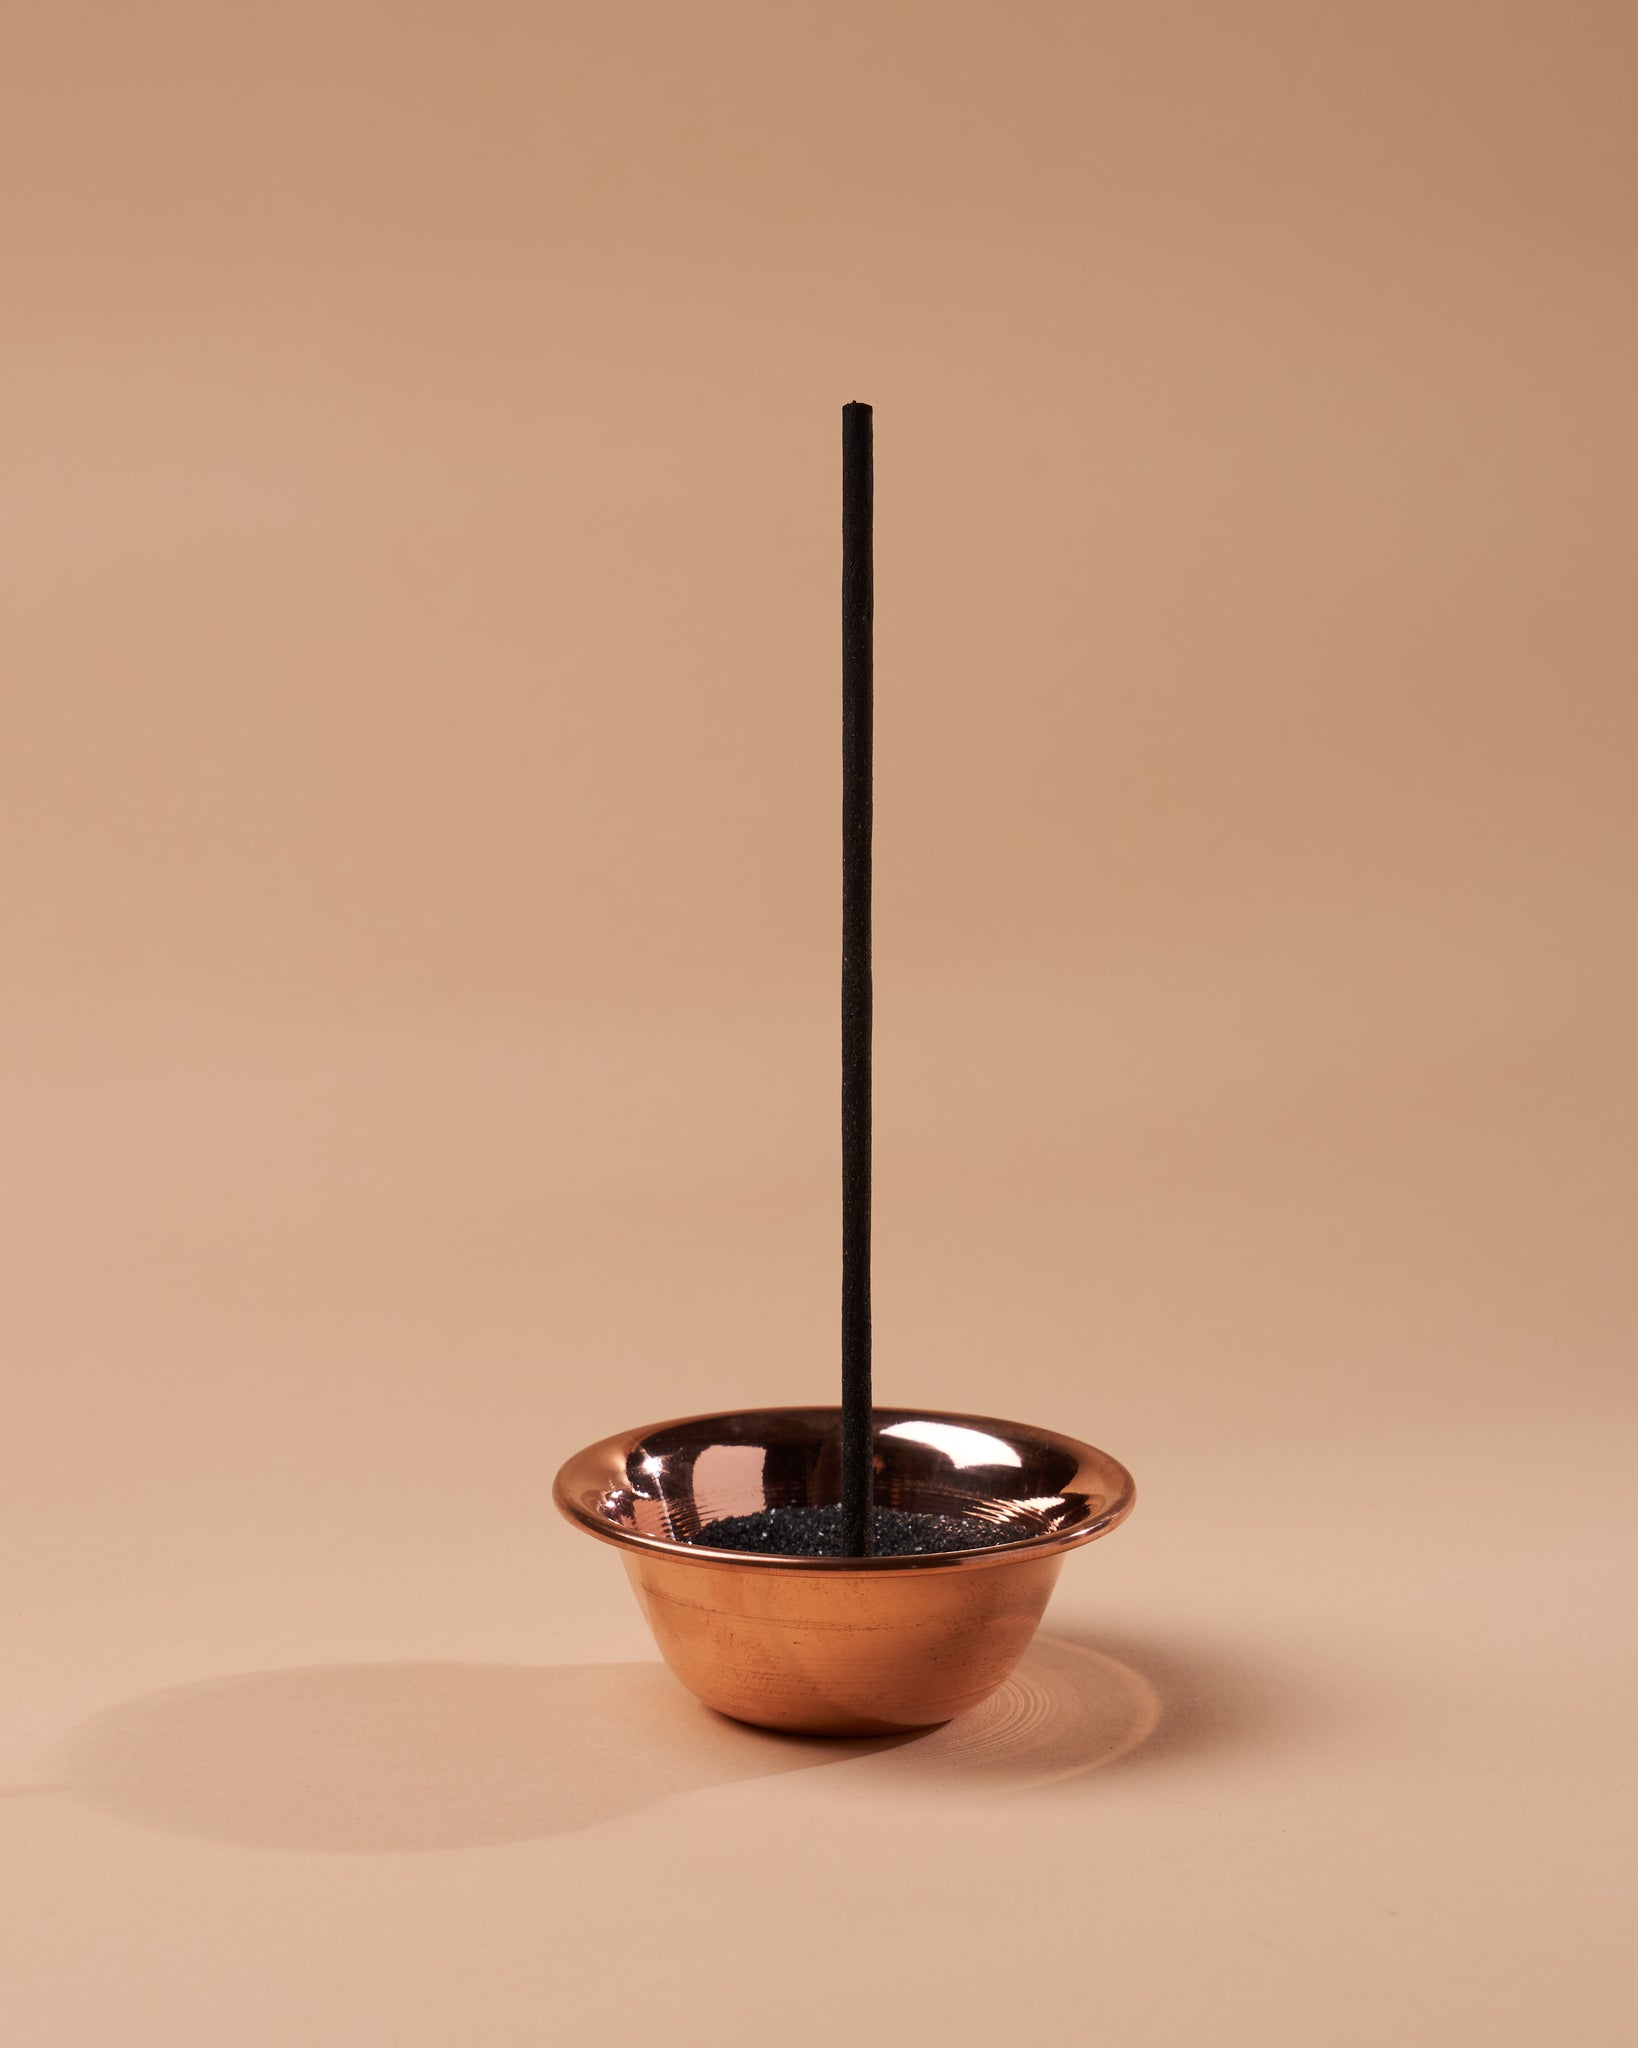 Pure Copper Offering Bowl - Ideal for Burning Incense and Resins, 3-4 inches in Diameter, 2 inches in Height